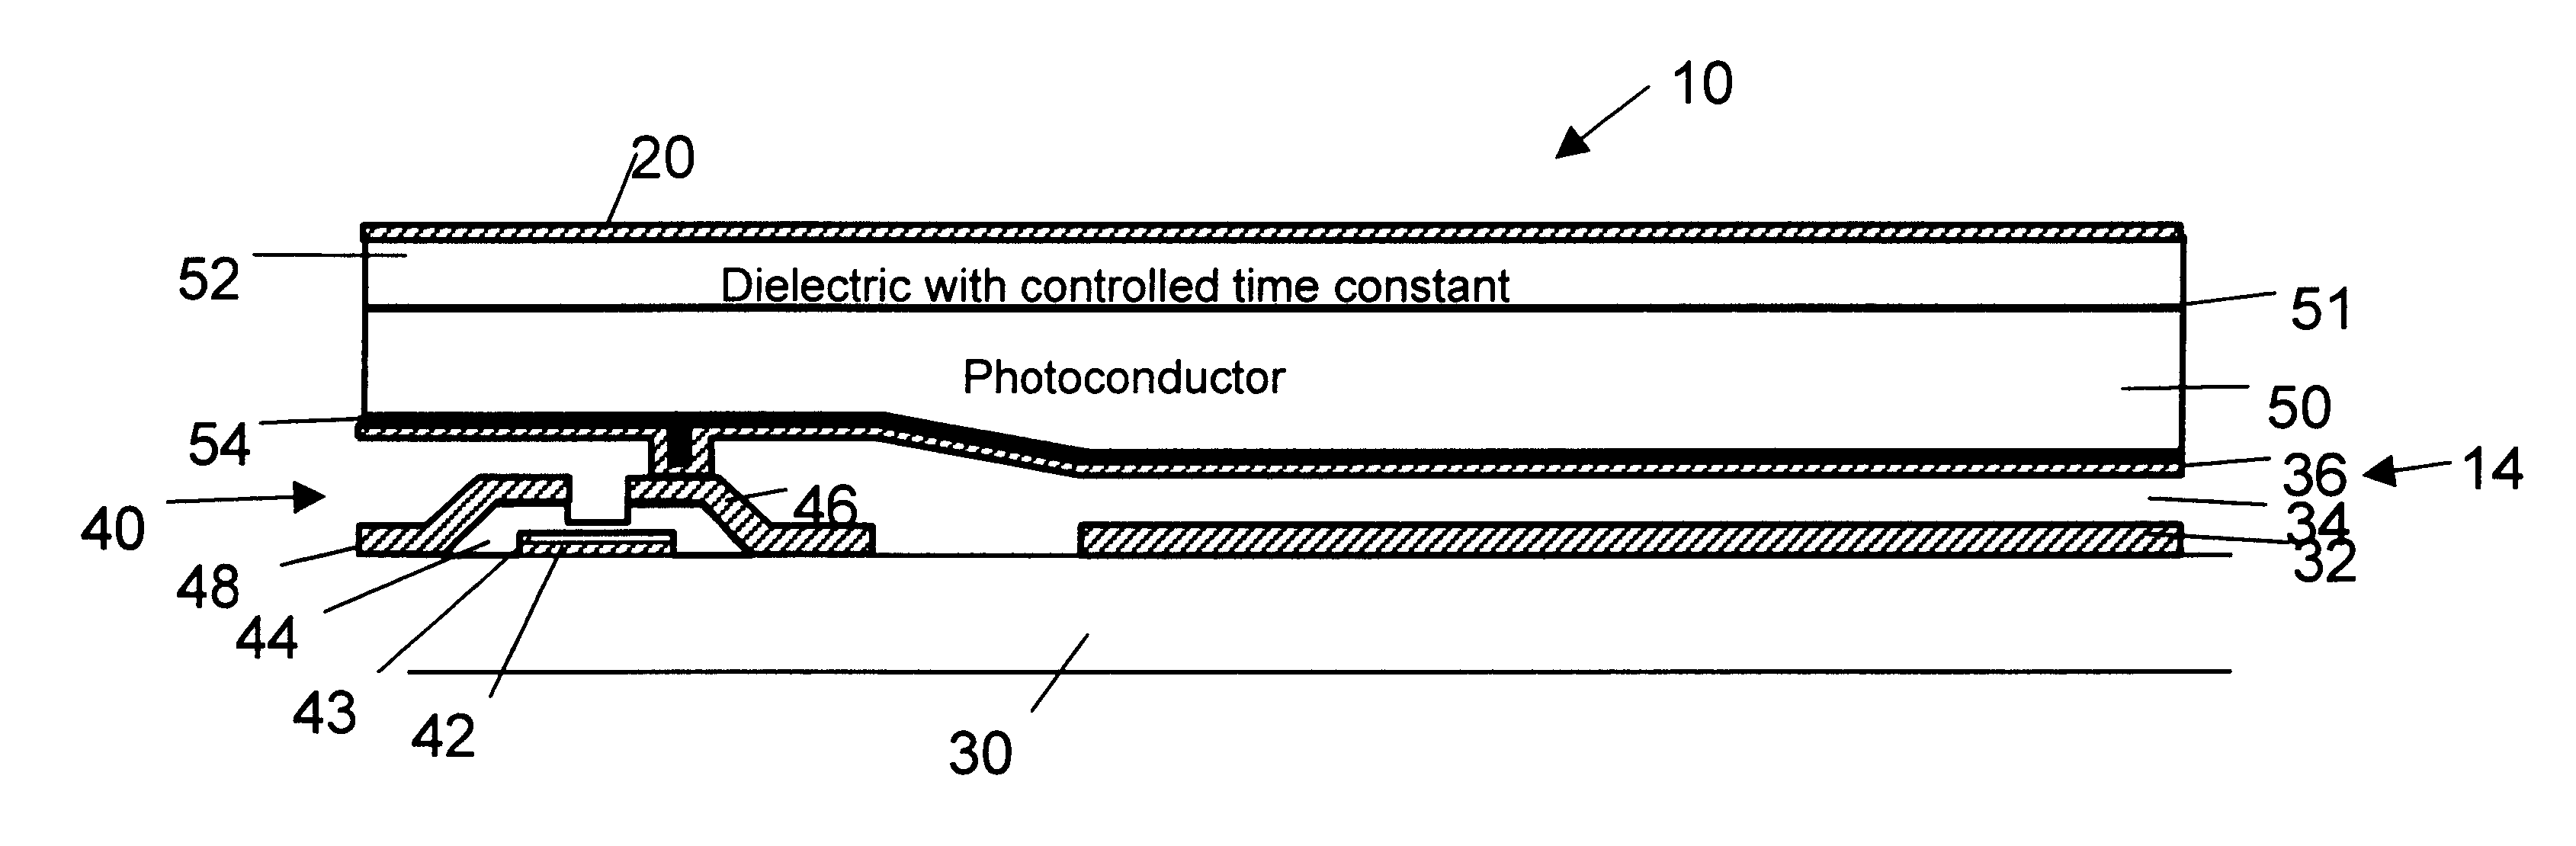 Direct radiographic imaging panel having a dielectric layer with an adjusted time constant